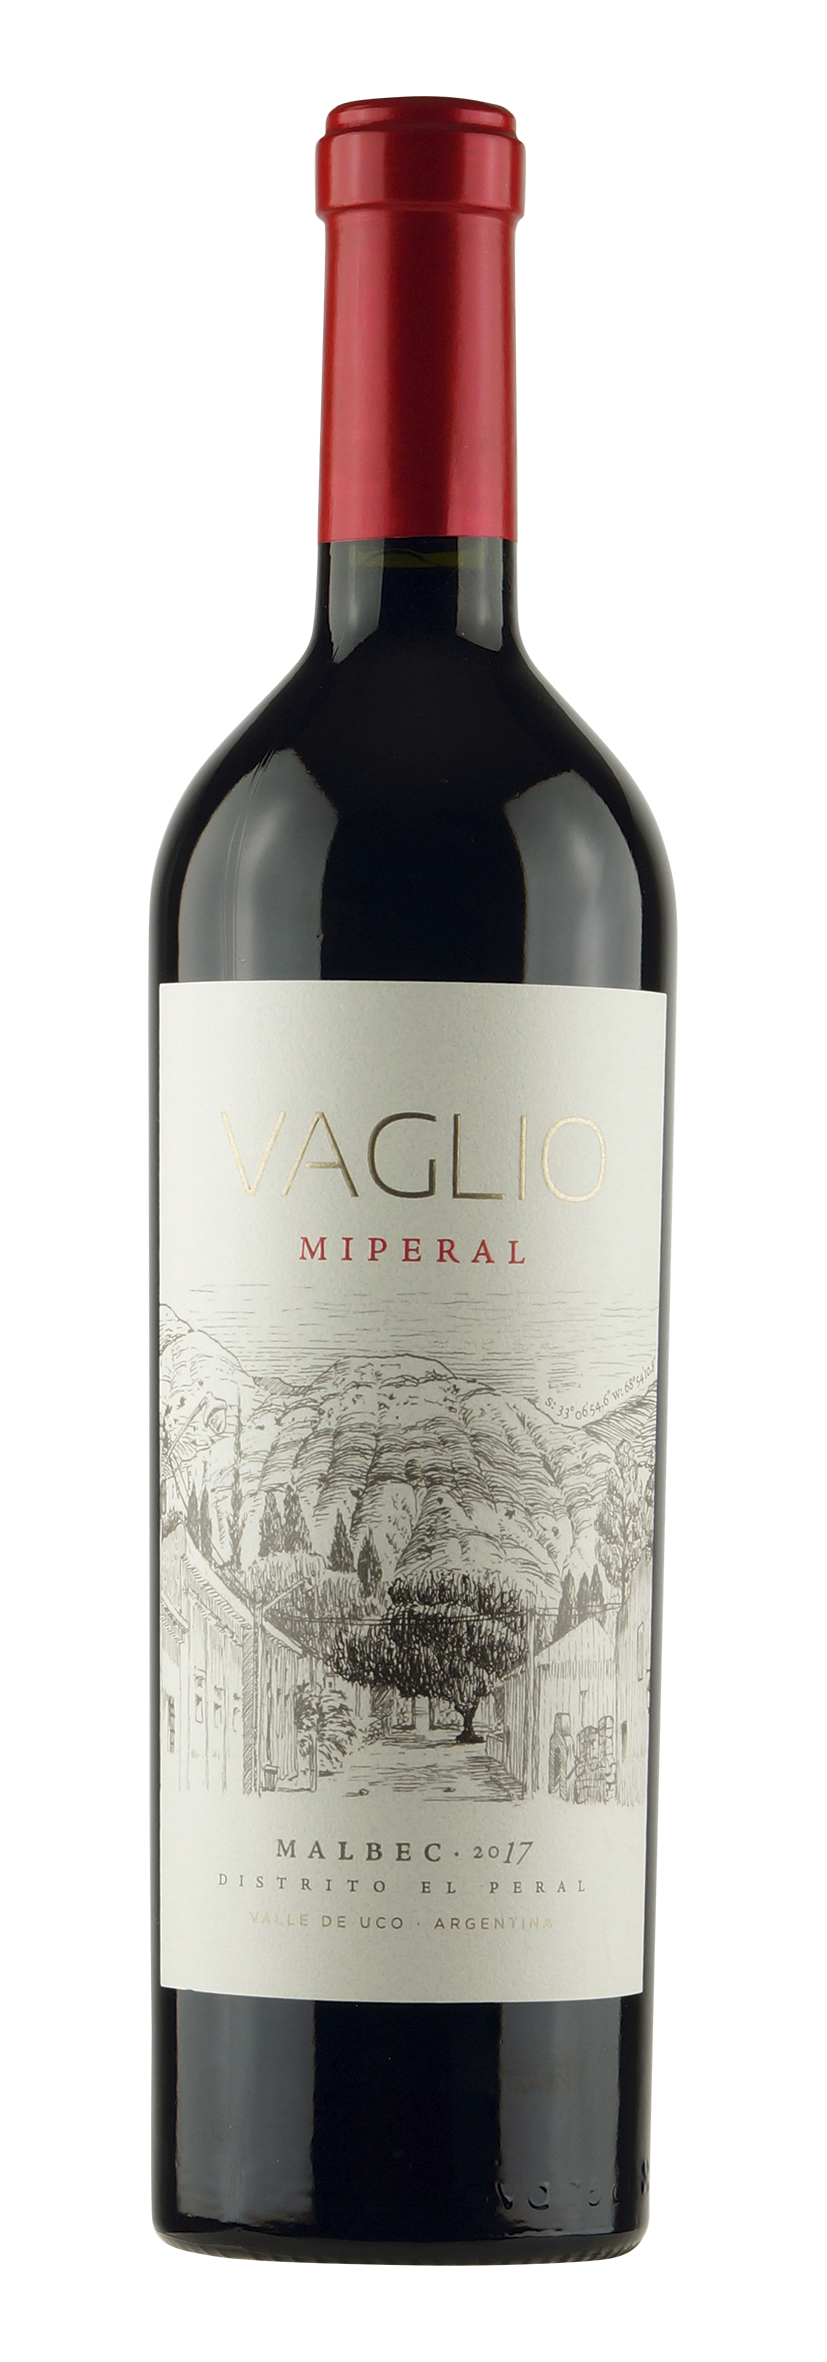 Uco Valley Malbec Miperal 2017